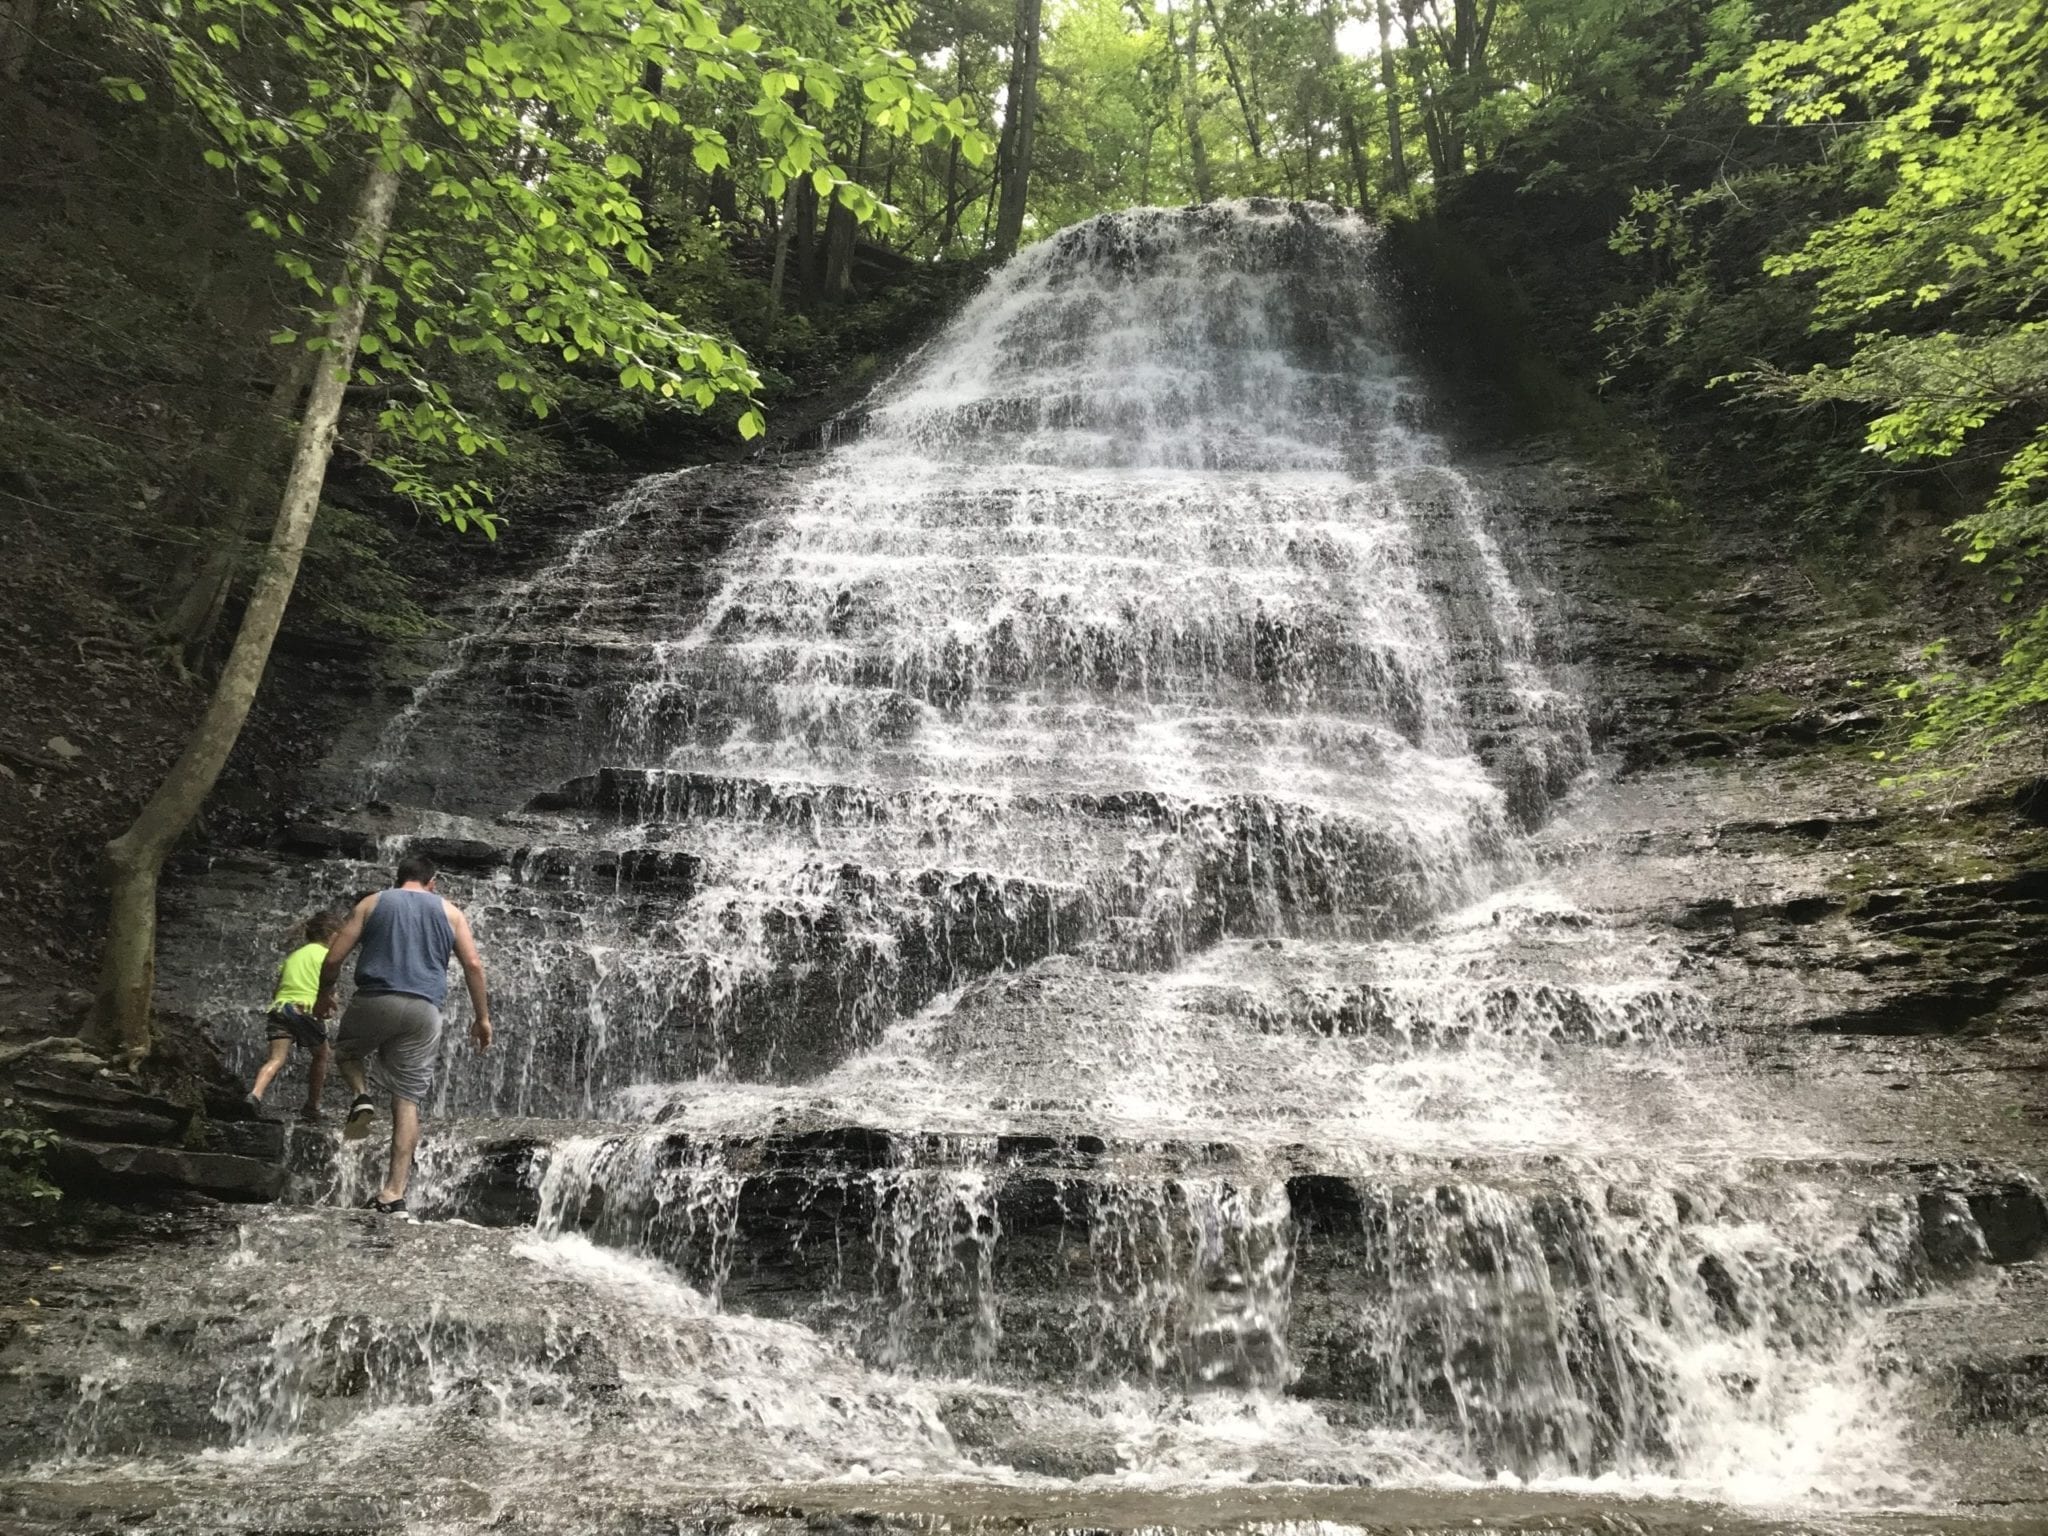 Sprakers Rd falls on – Canajoharie, Montgomery